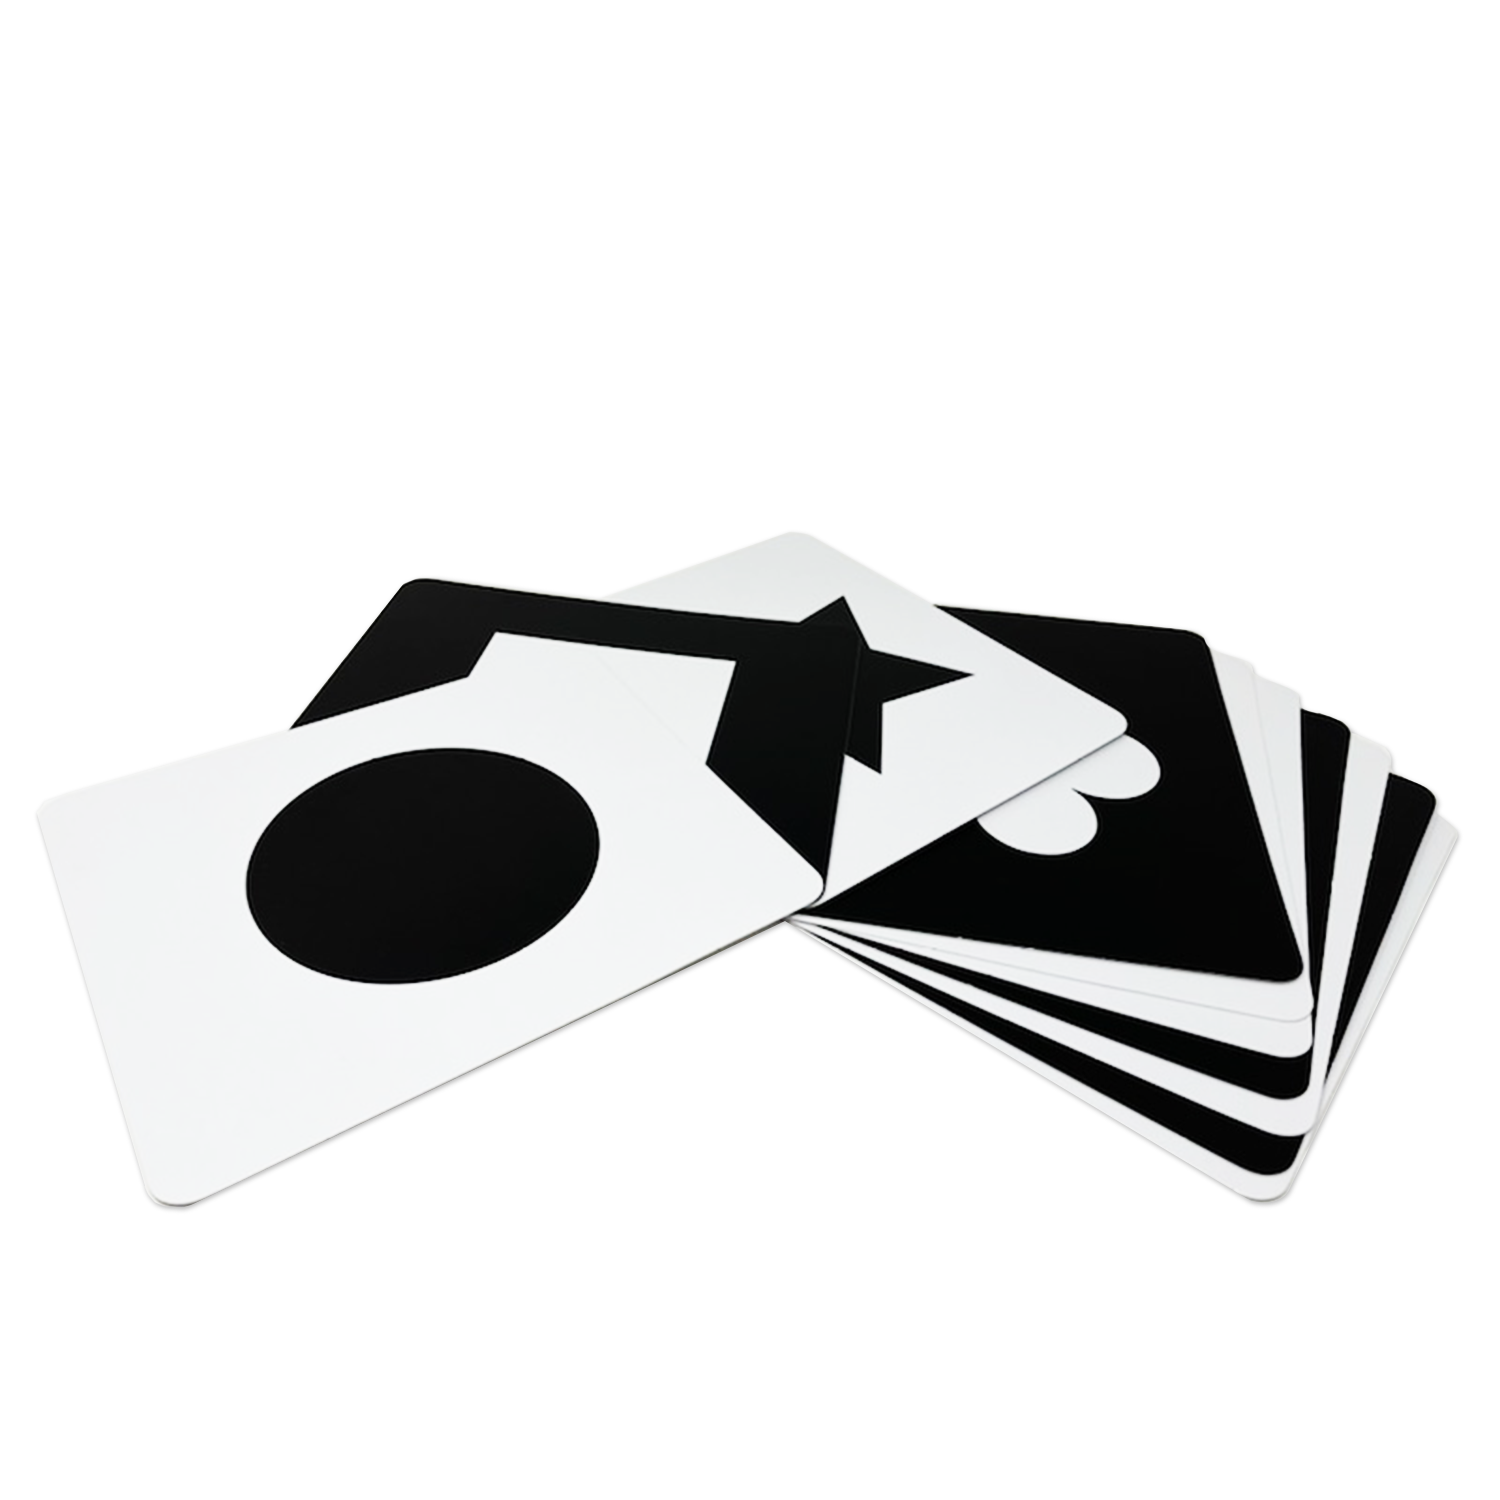 high contrast black and white flashcards for newborn baby